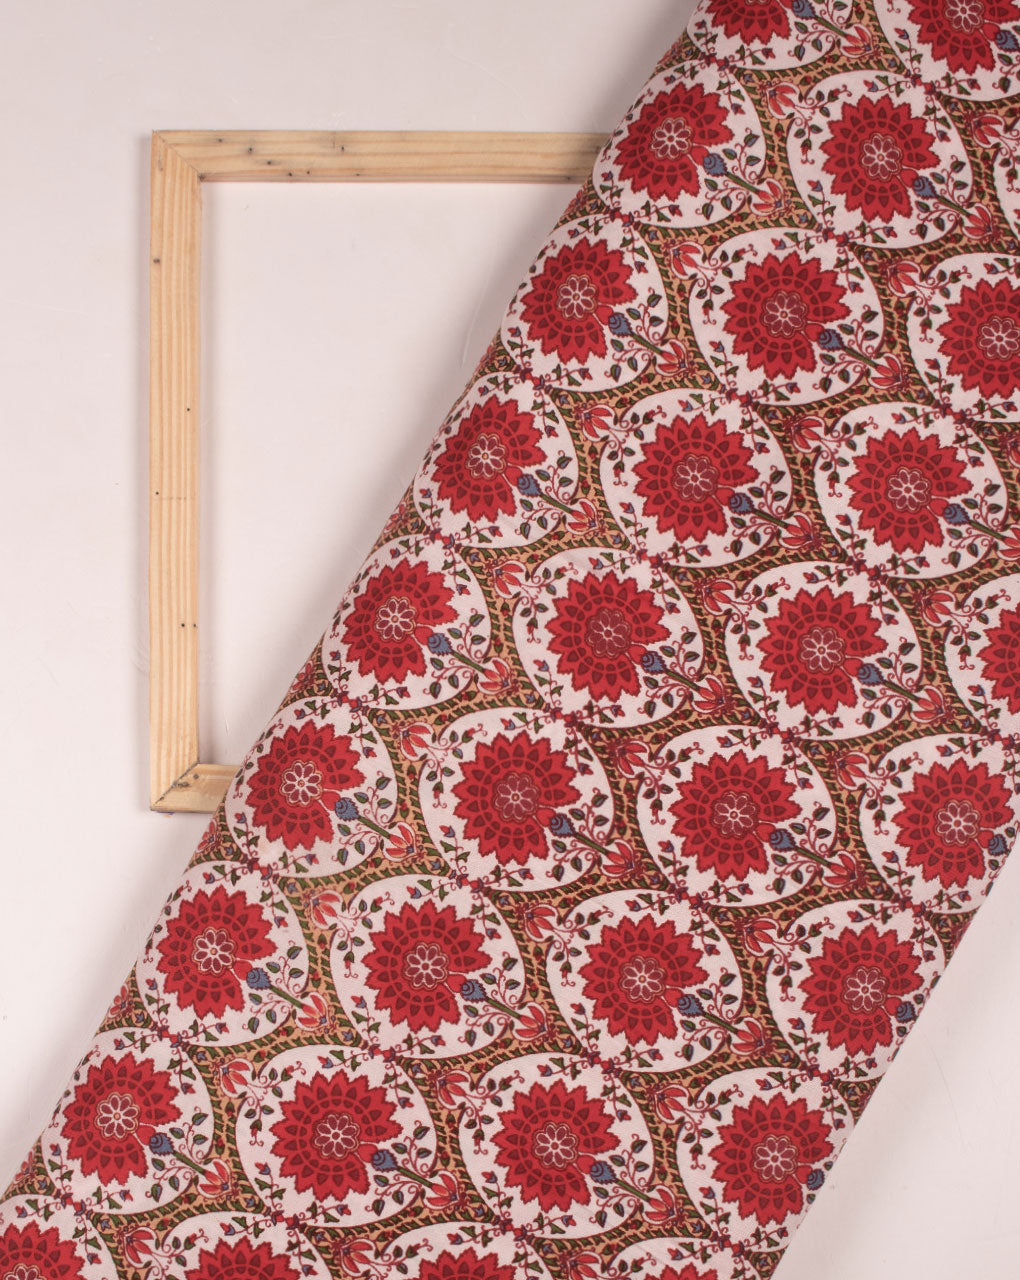 White Red Floral Pattern Screen Print Rayon Fabric - Fabriclore.com